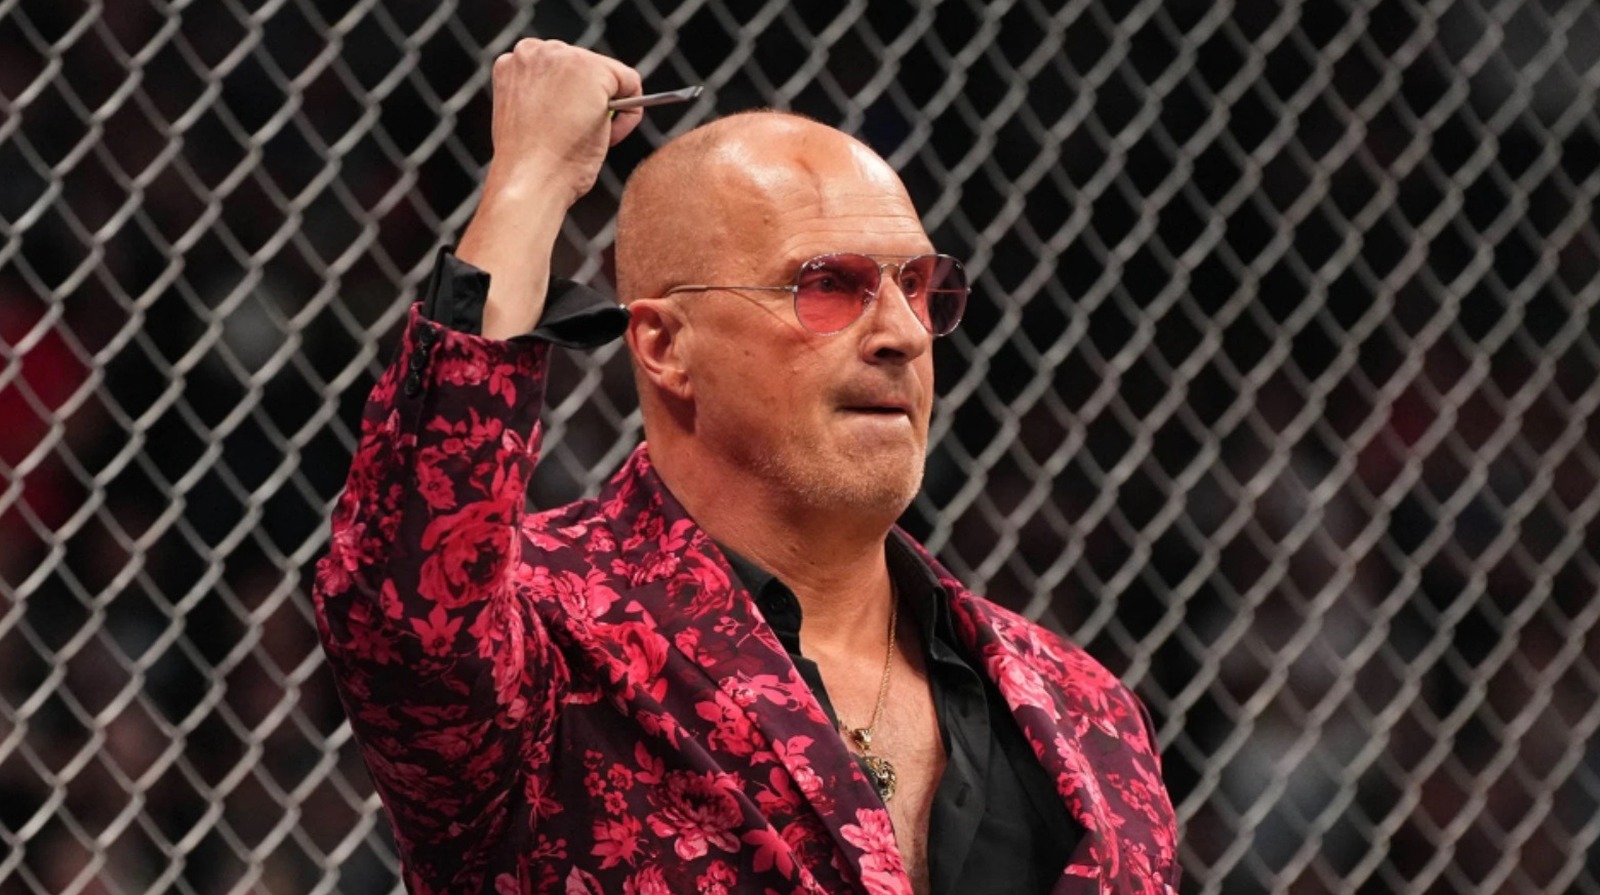 Don Callis Teases Building 'A New Family' In AEW To Take On The Elite